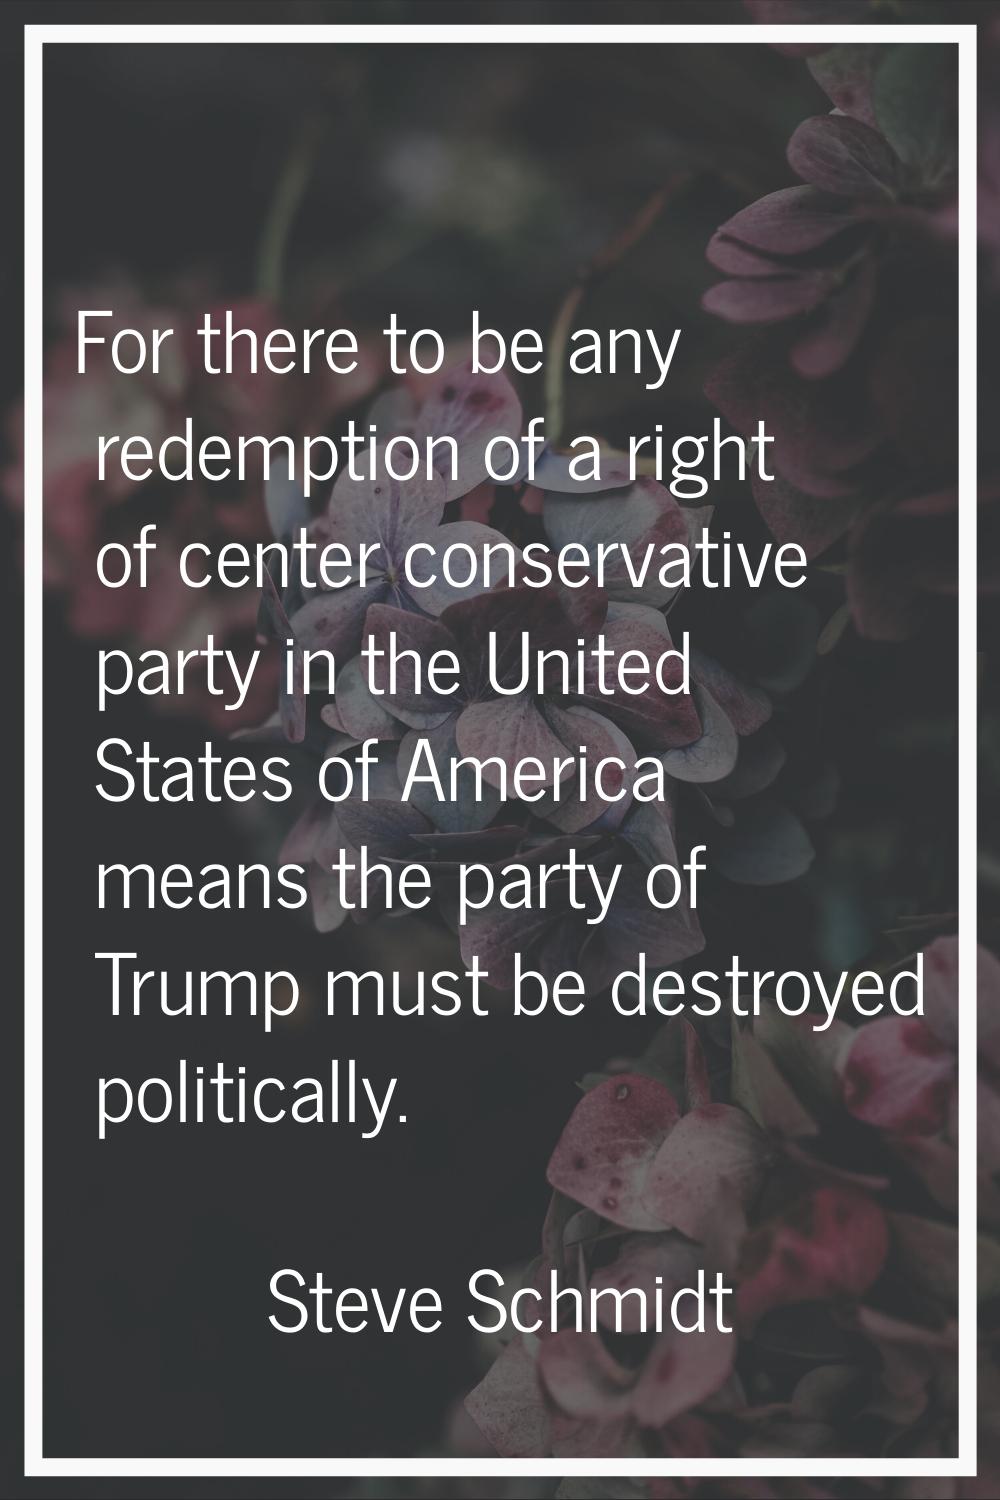 For there to be any redemption of a right of center conservative party in the United States of Amer